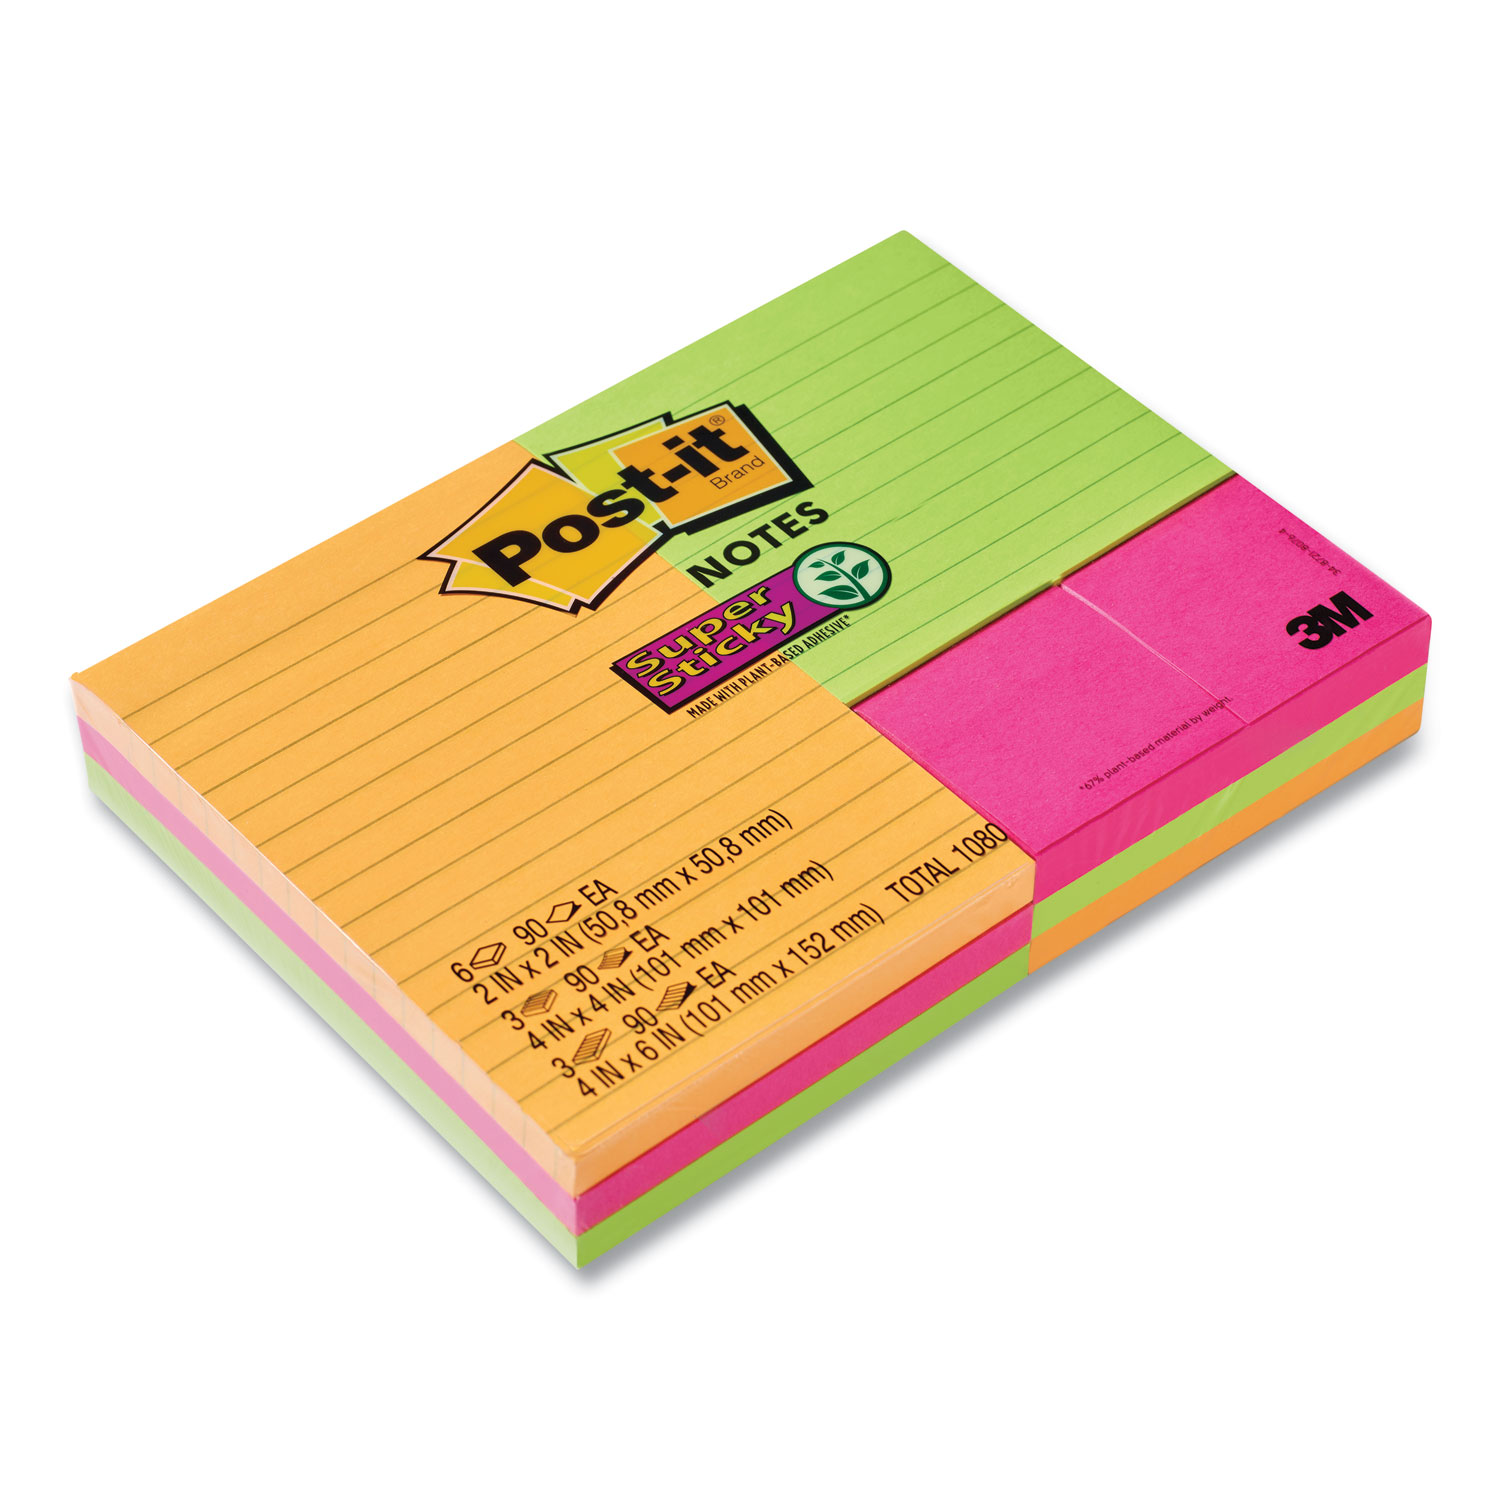  Post-it Notes Super Sticky 4642-12SSAU Pads in Rio de Janeiro Colors, Combo Pack, 6 Plain 1.88 x 1.88, 3 Lined 4 x 4, 3 Lined 4 x 6, 90 Sheets/Pad, 12 Pads/Pack (MMM2937169) 